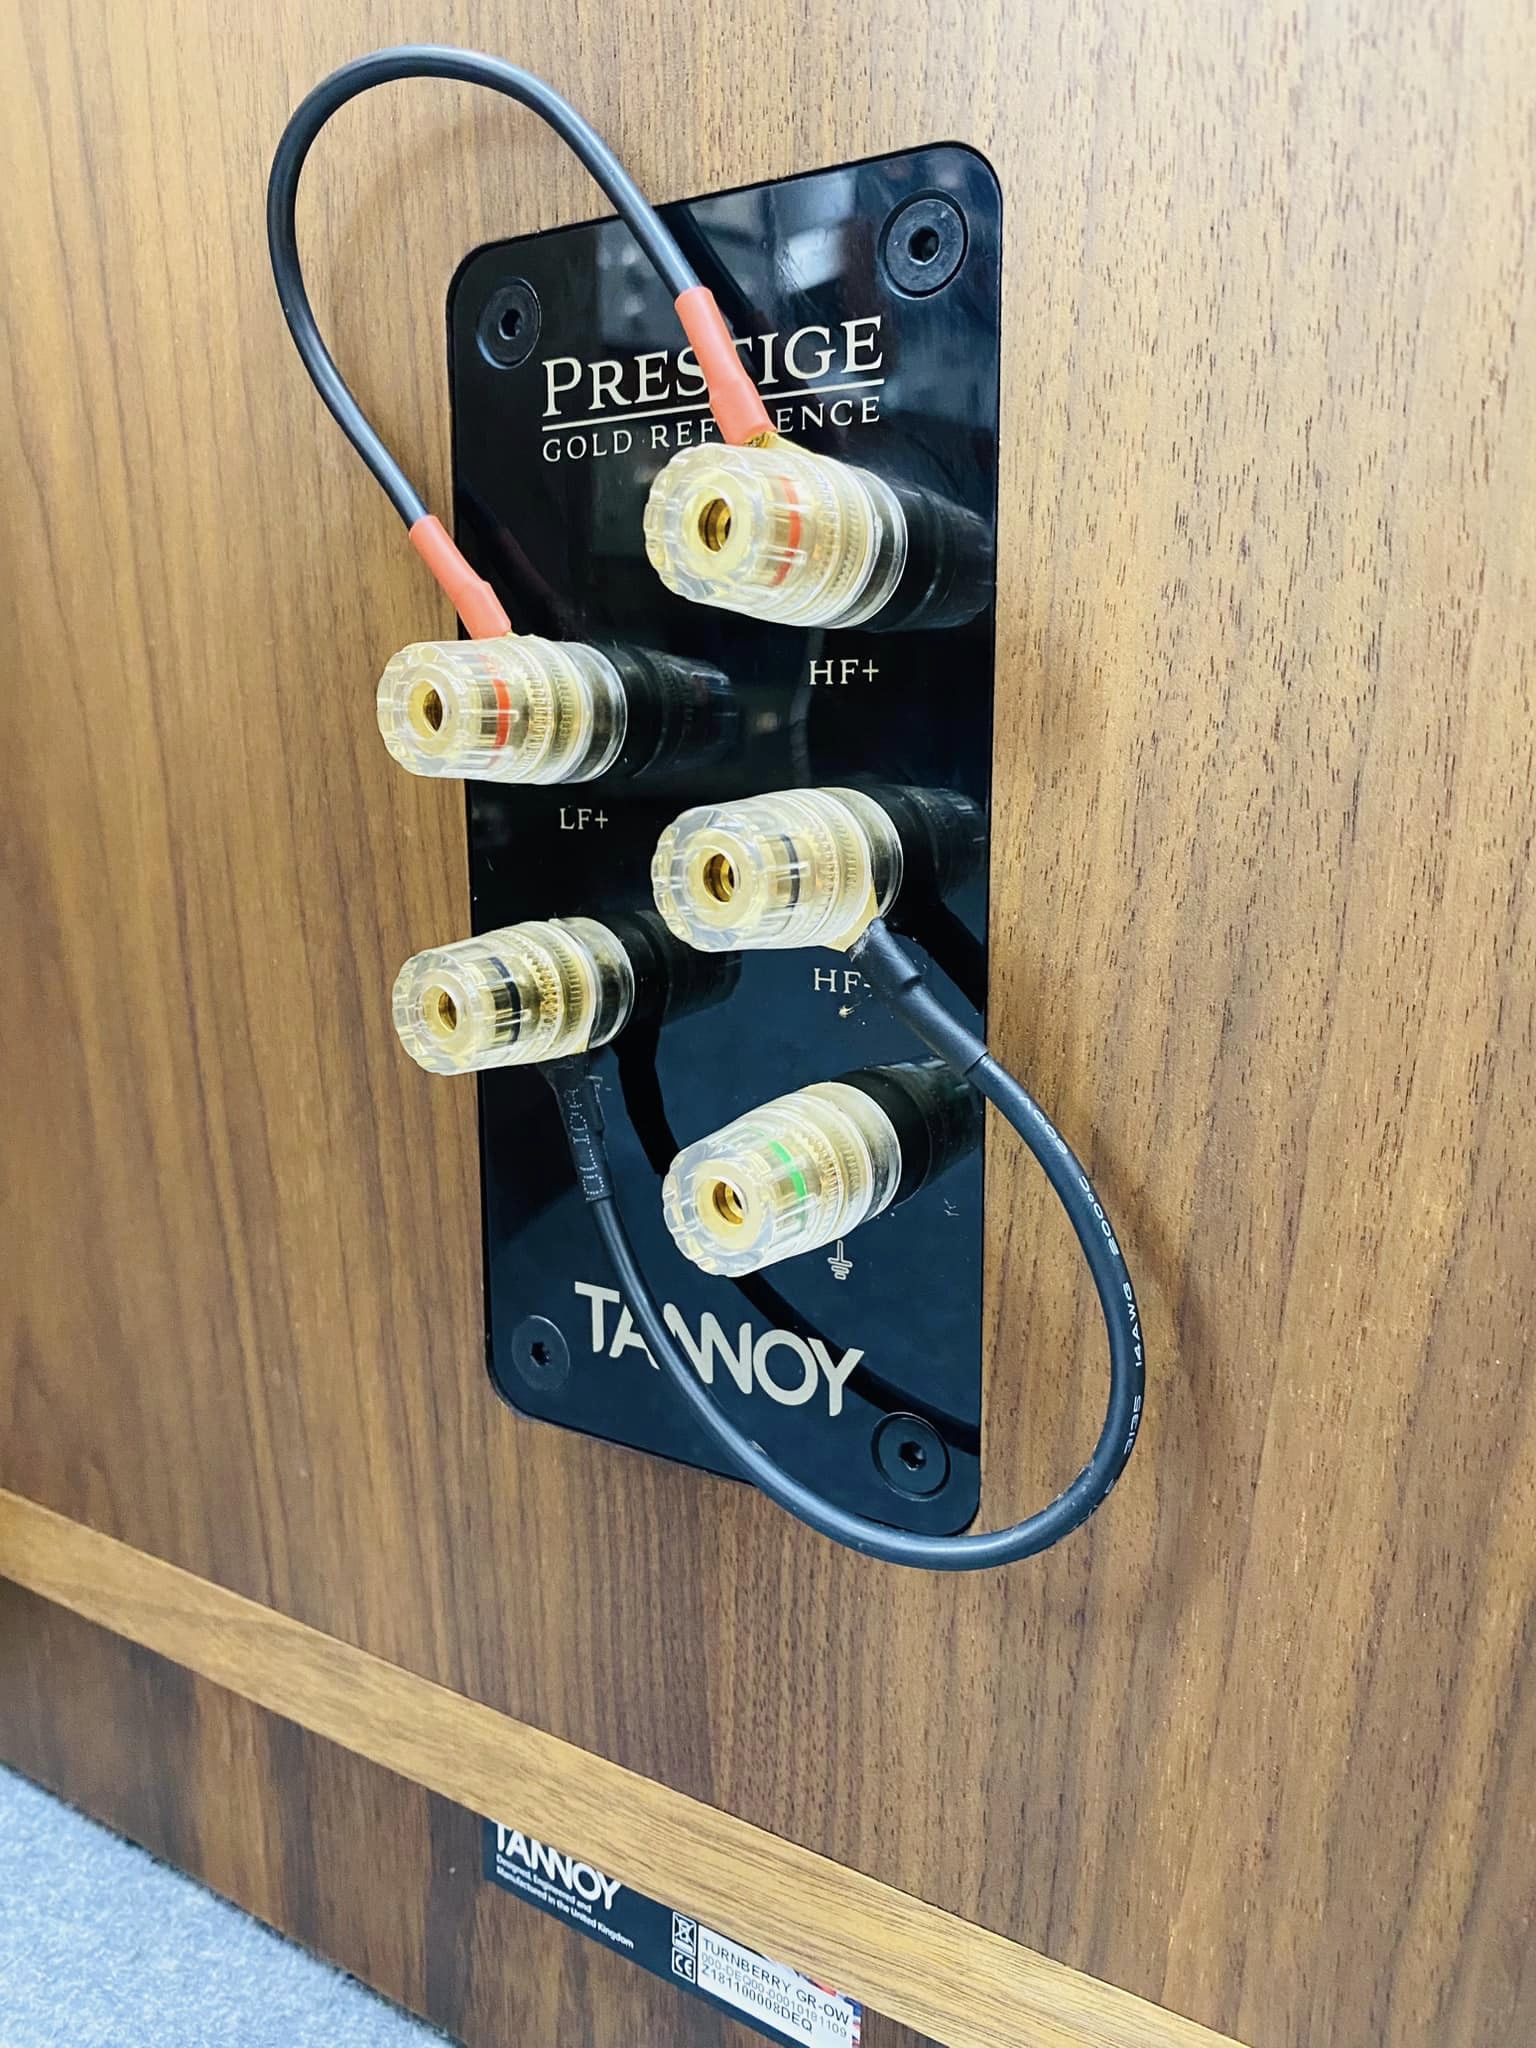 TANNOY Turnberry GR cọc loa